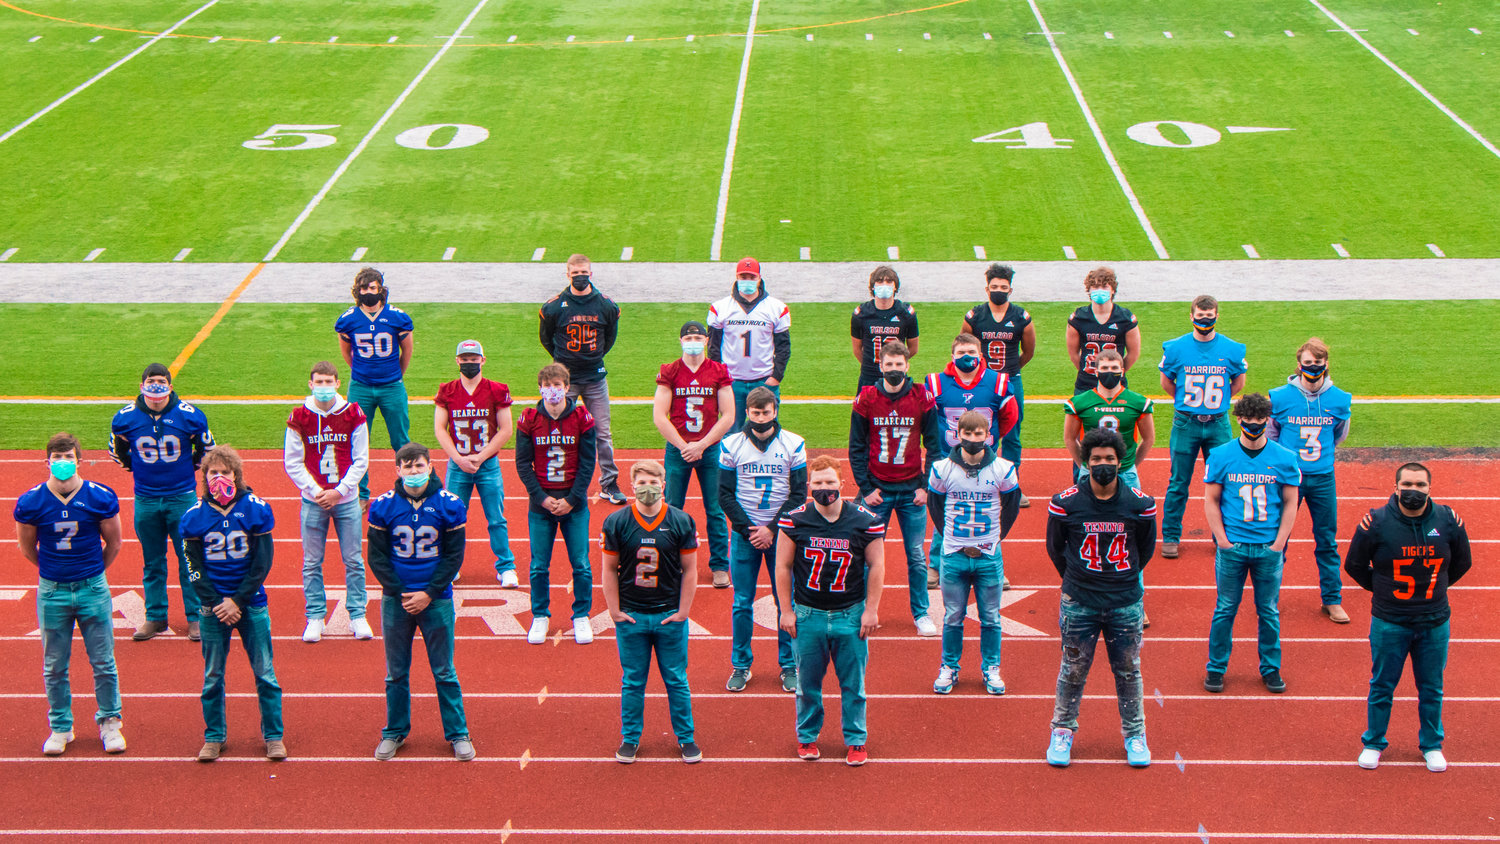 Athletes chosen for the All-Area Football team pose for a photo at Tiger Stadium sporting their school’s football jerseys.